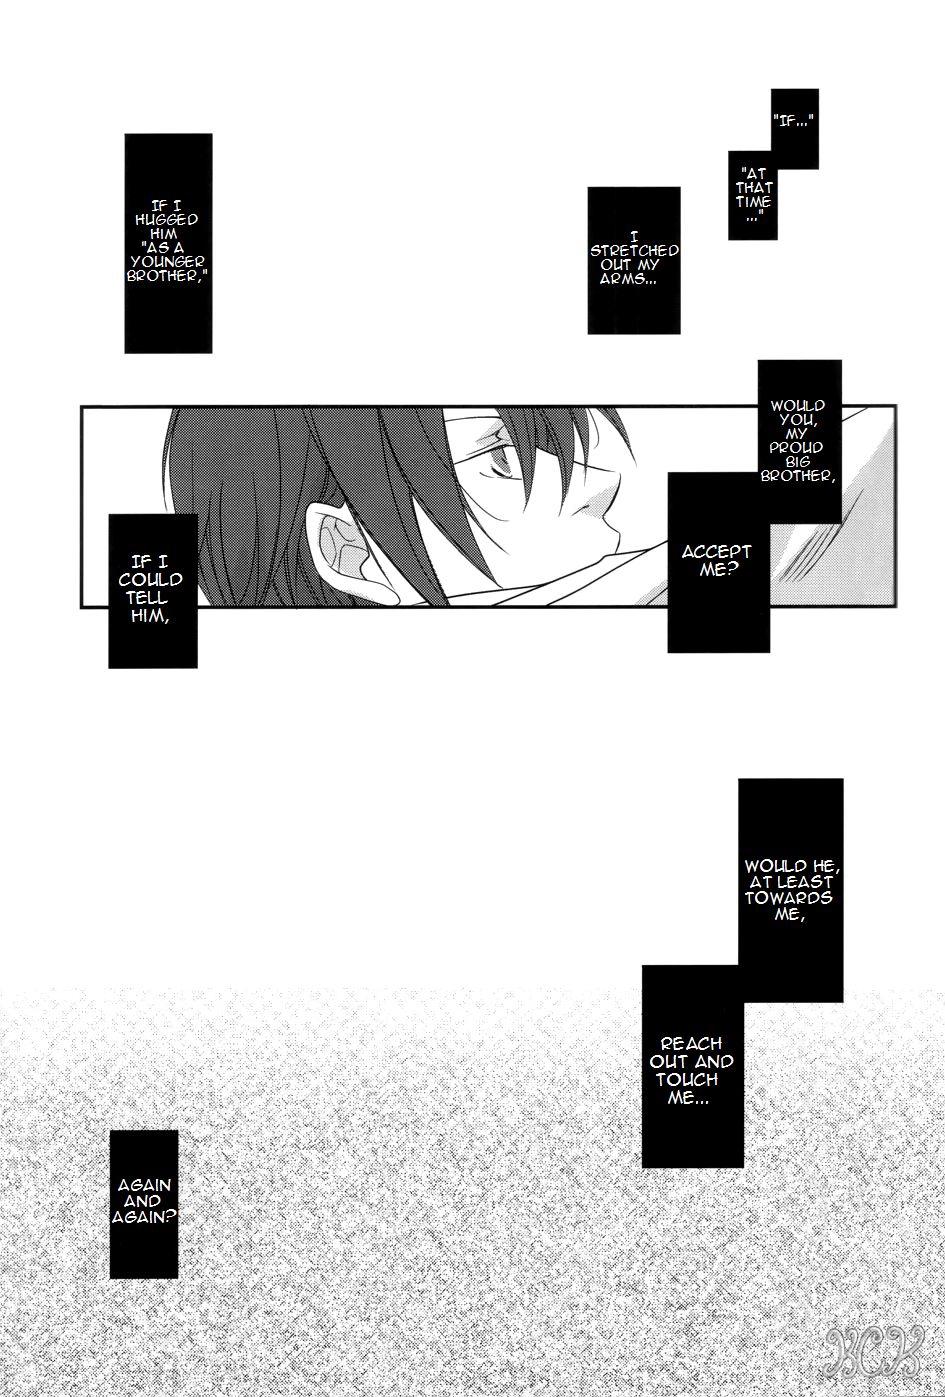 Sucking However, It's Beloved, Isn't It? - Durarara Couple Sex - Page 6